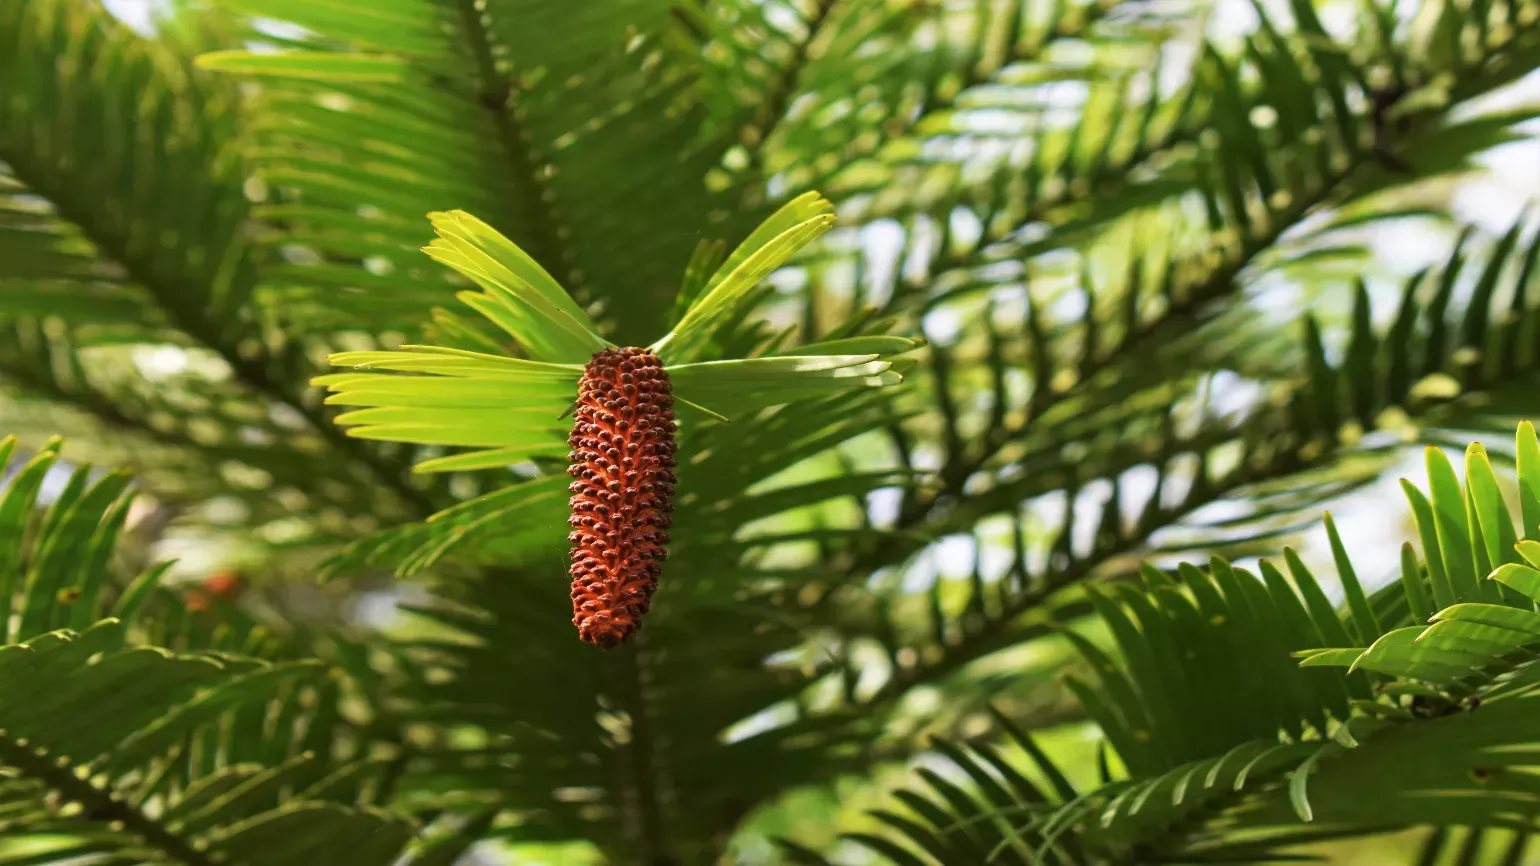 Narrow male cone of wollemi pine